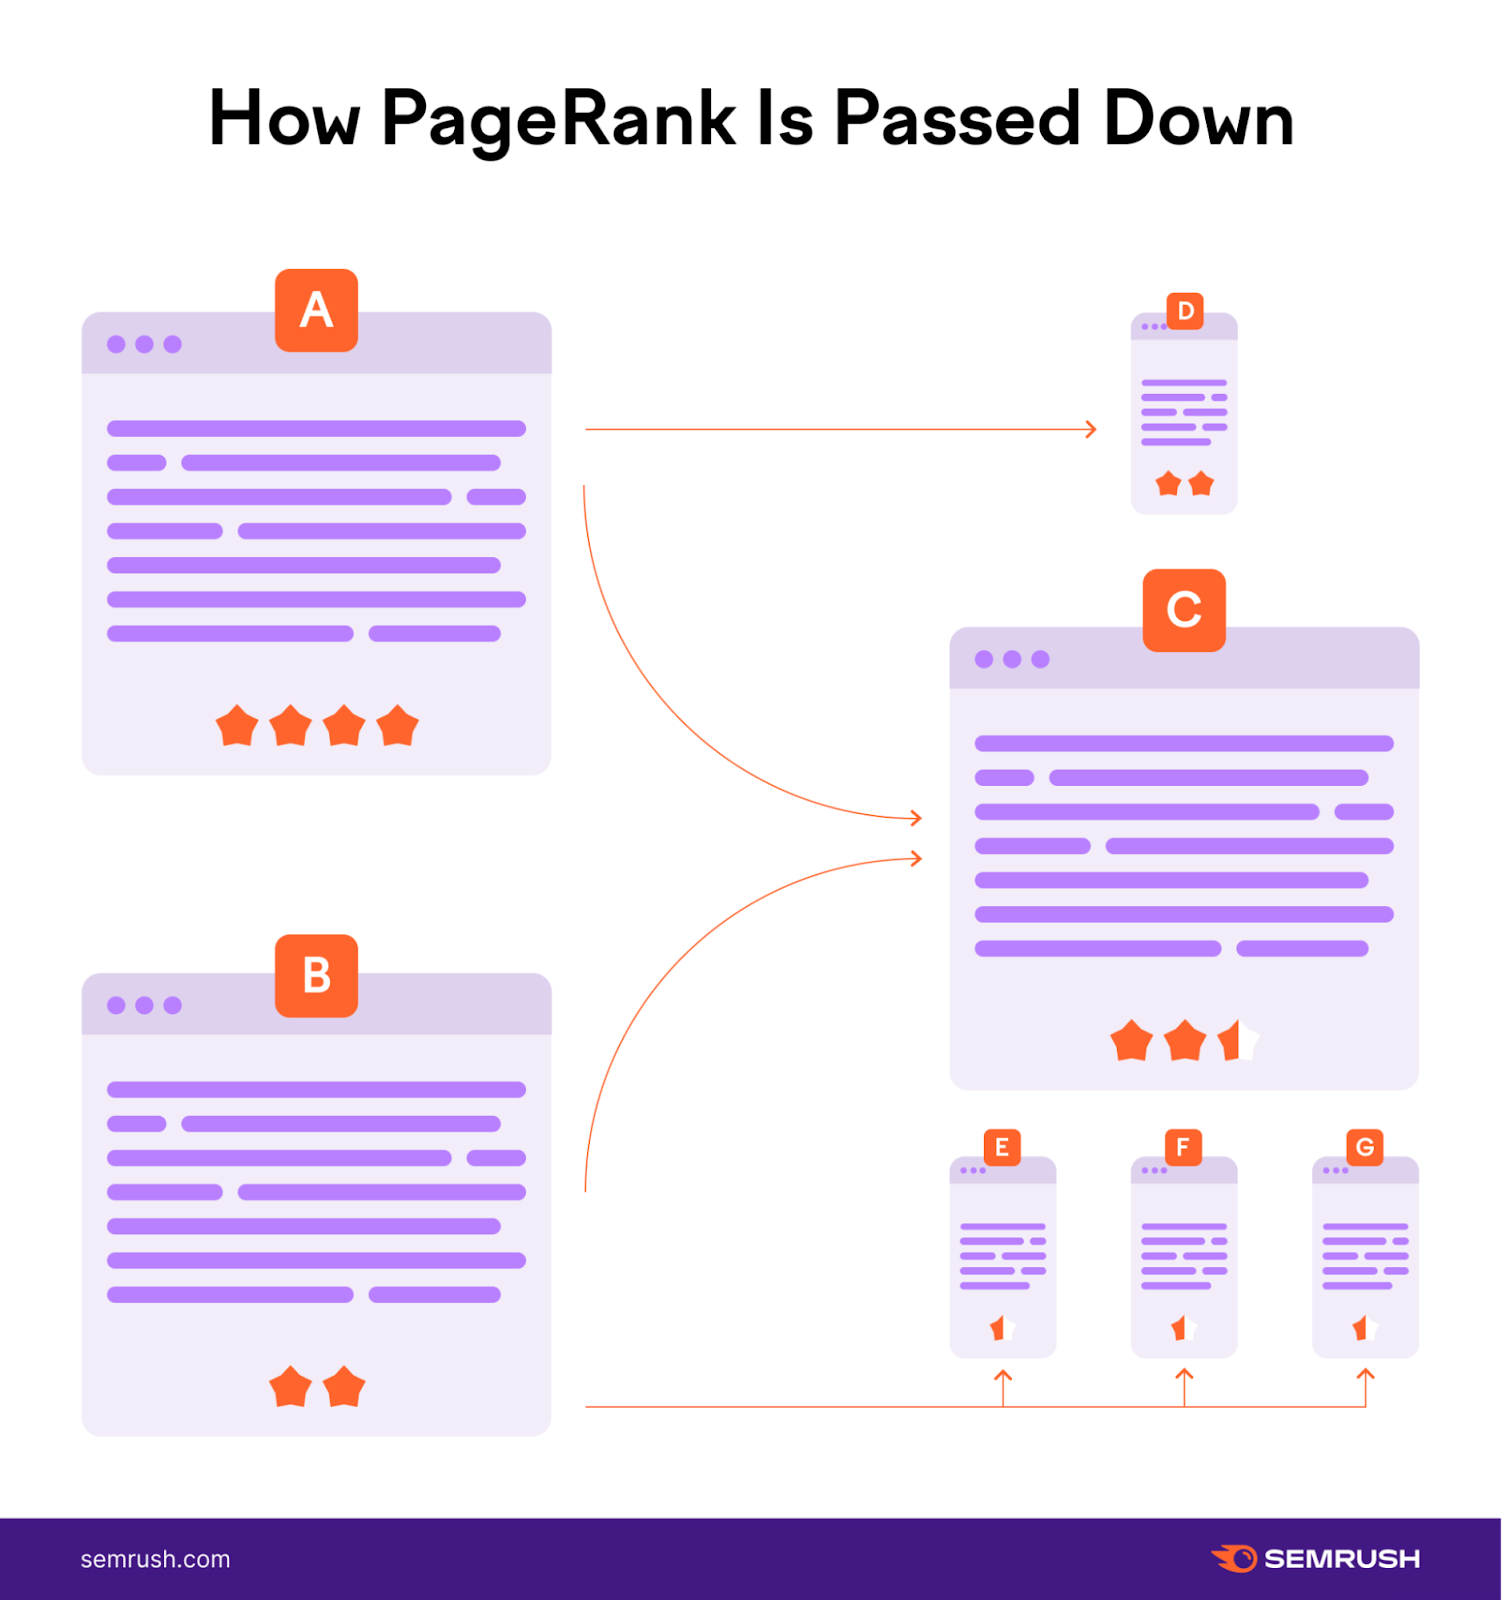 an infographic s،wing ،w PageRank is p،ed down